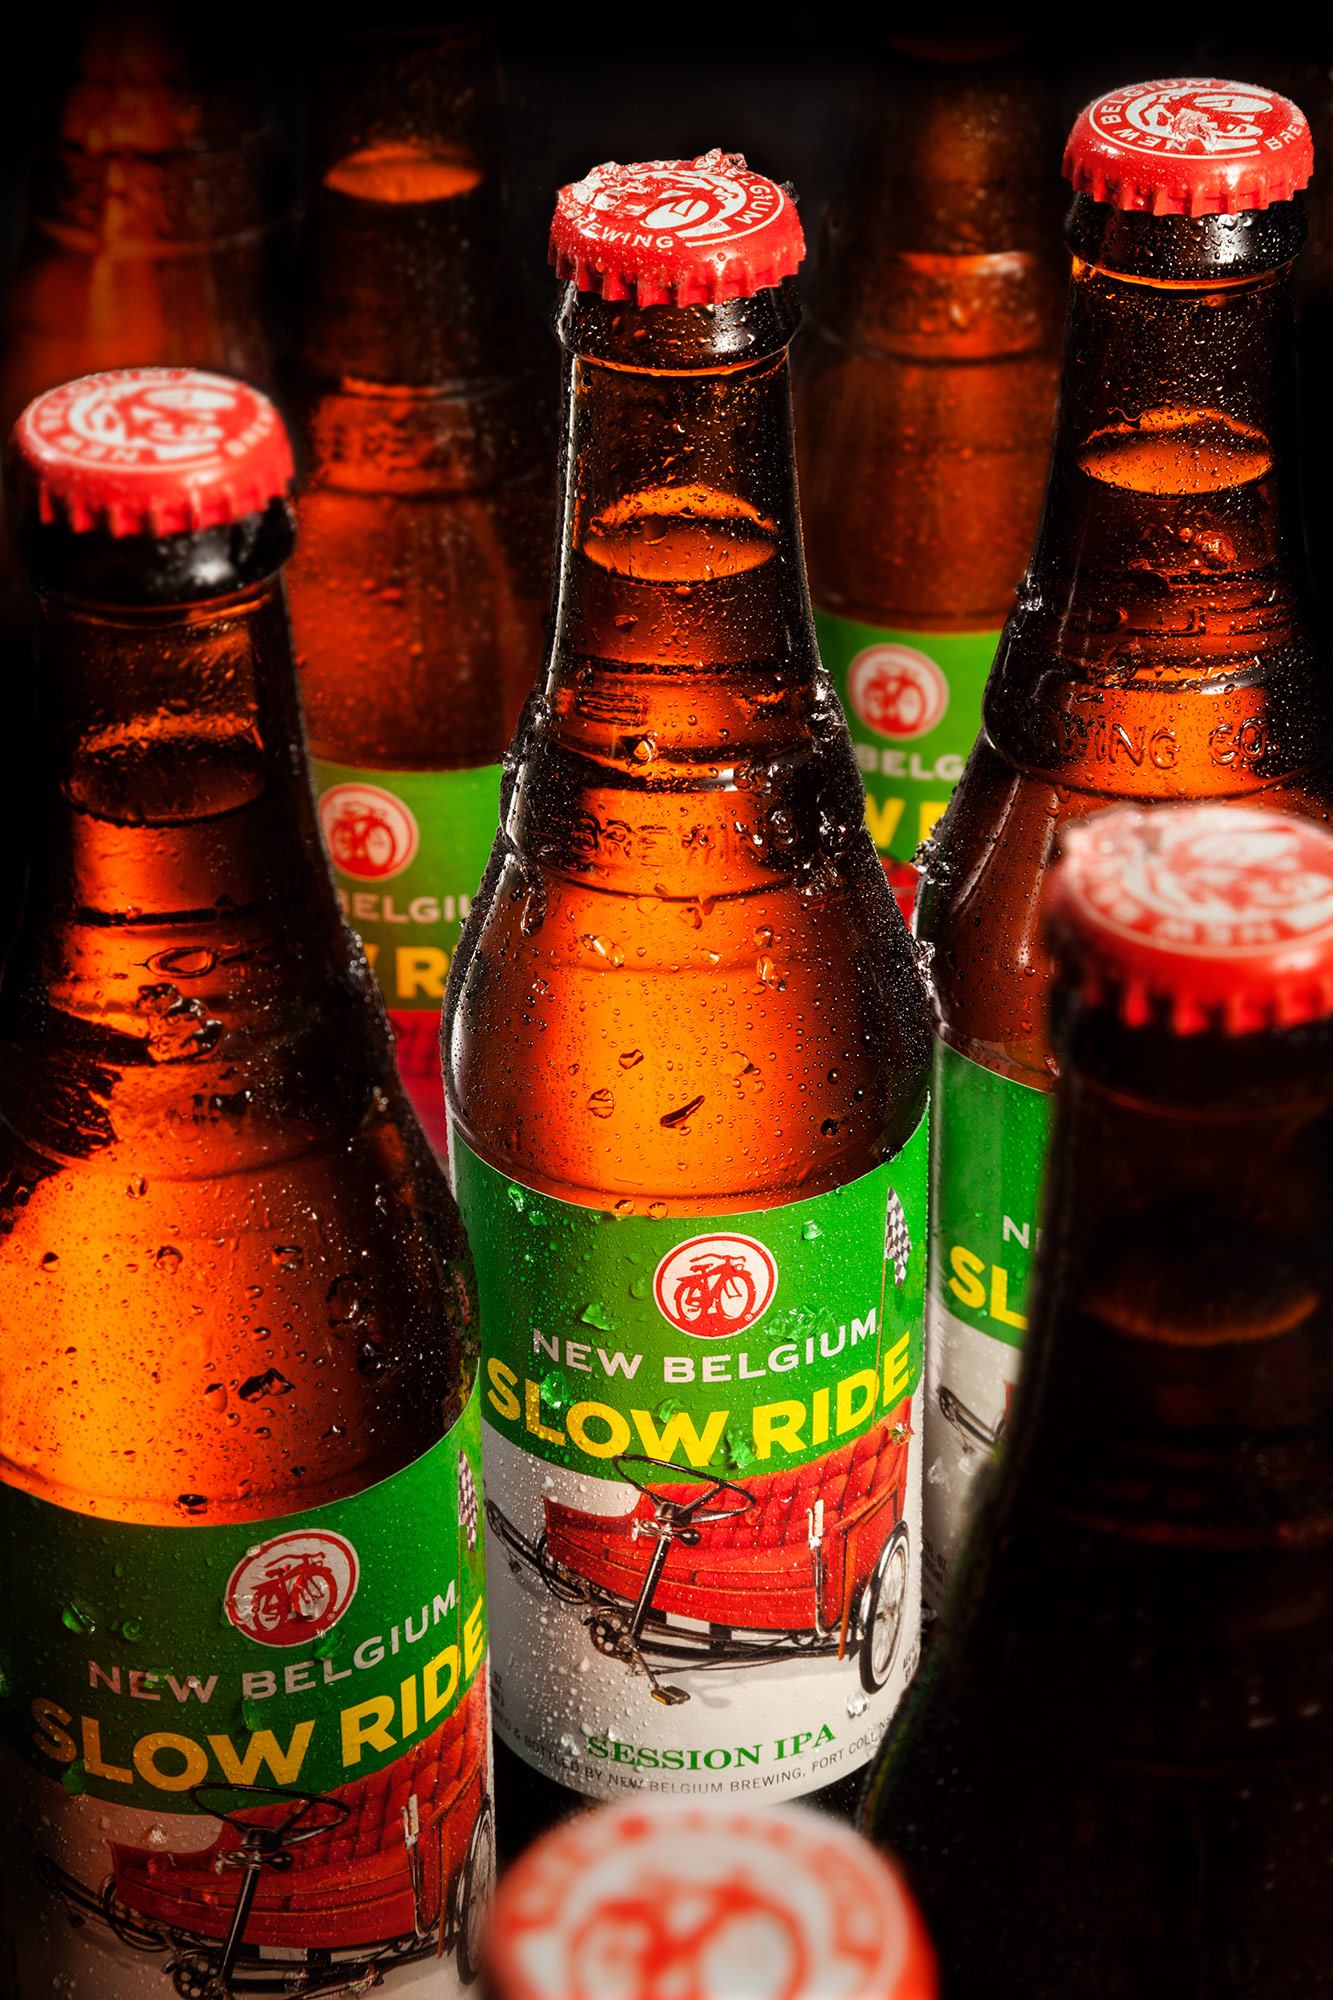 John Early High-End Digital Retouching - New Belgium Slow Ride Icy Cold Bottle Close-Up